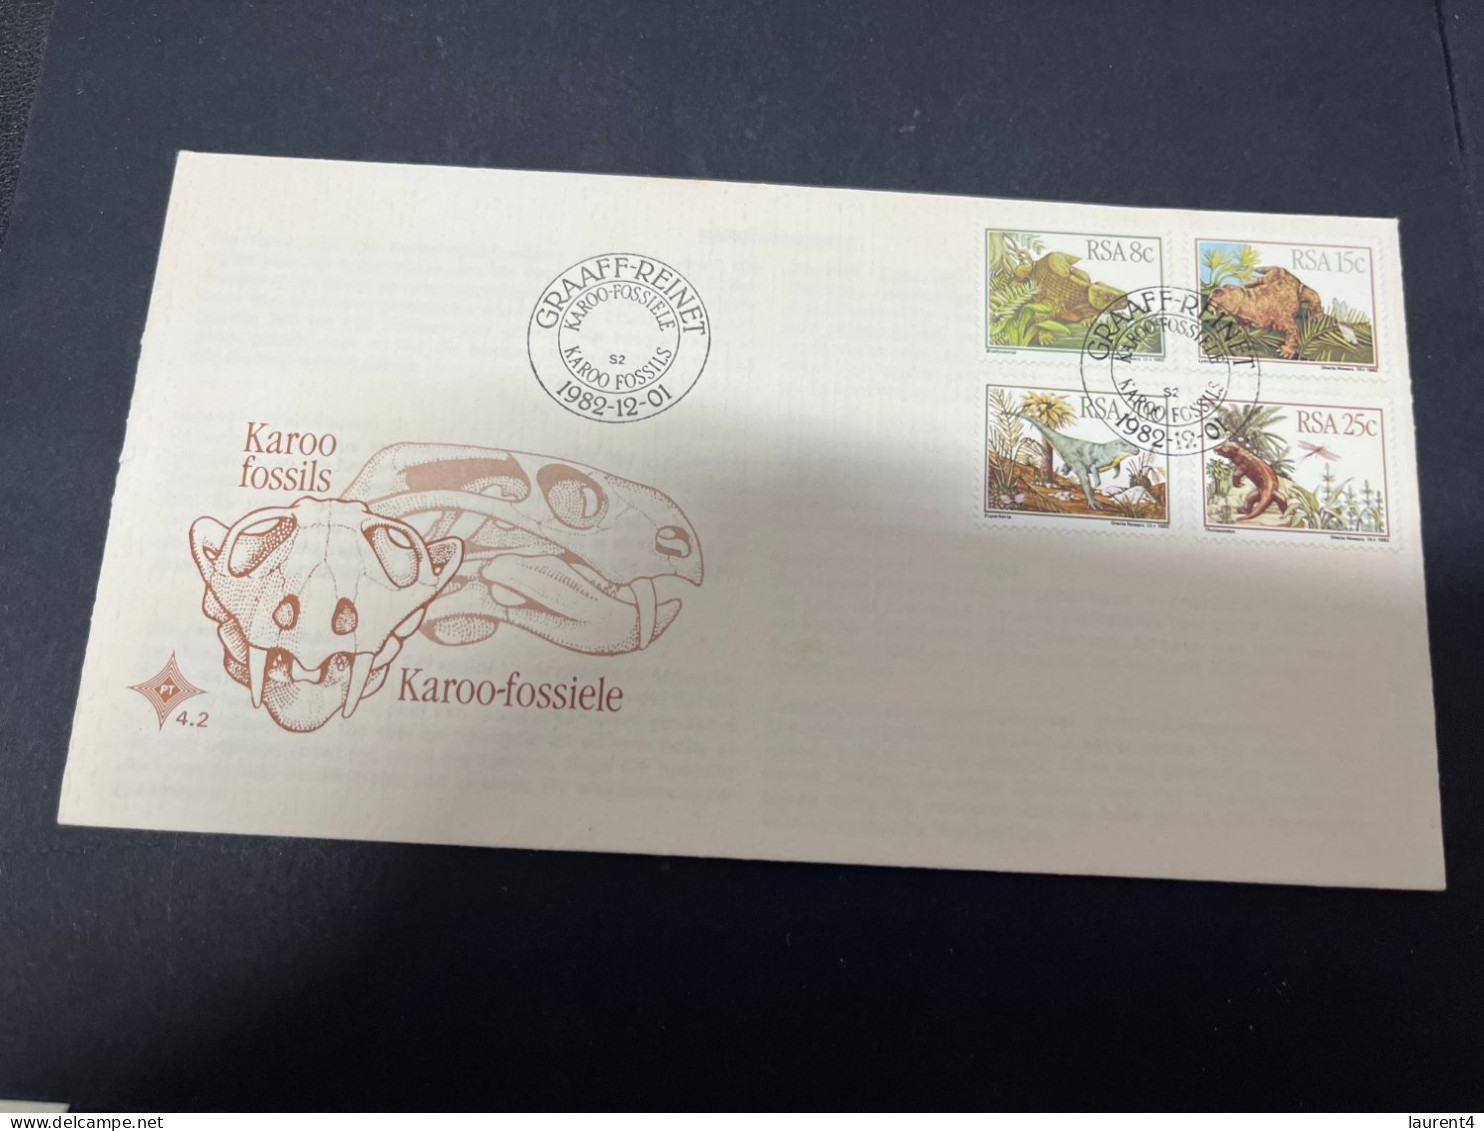 27-4-2024 (3 Z 14) FDC - South Africa (RSA) 1982 (dinosaurs) (including Insert) - FDC